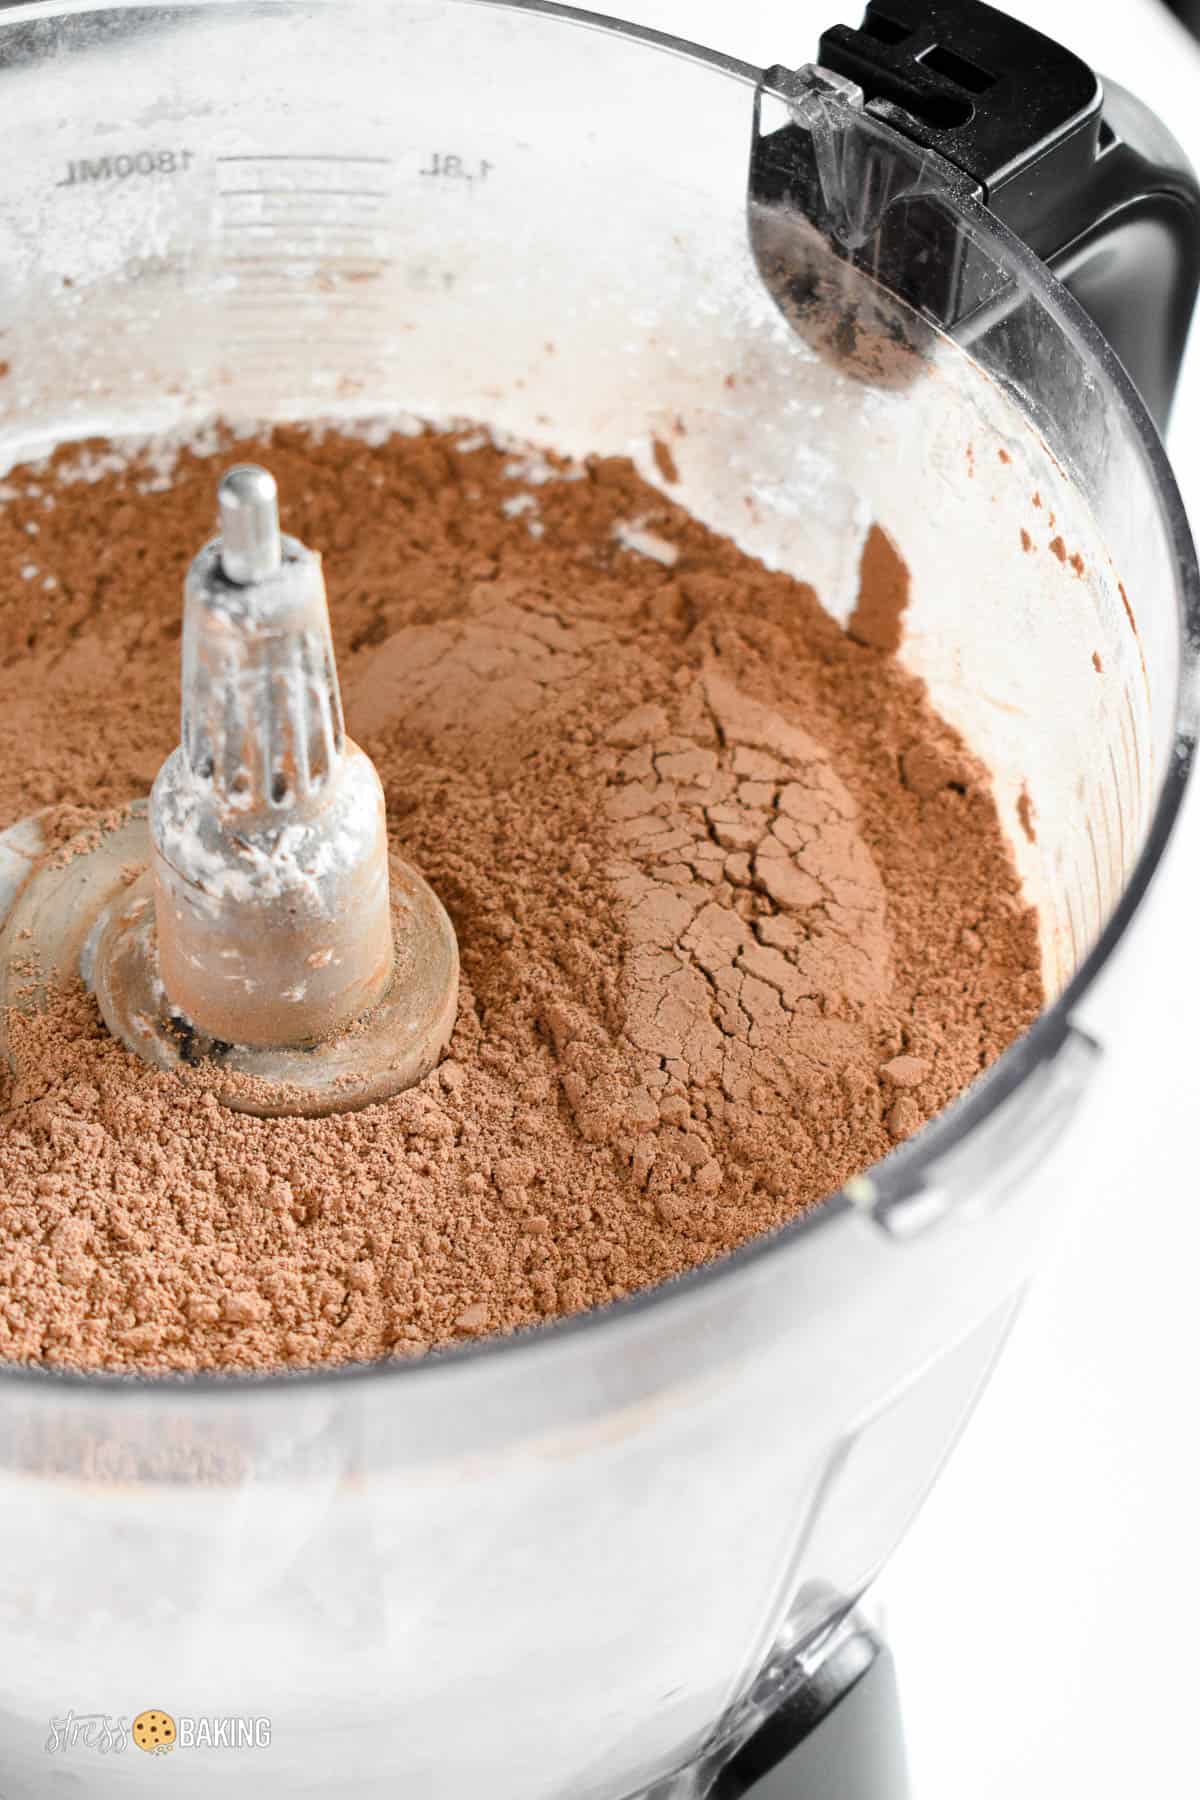 Freshly blended hot cocoa mix in a food processor